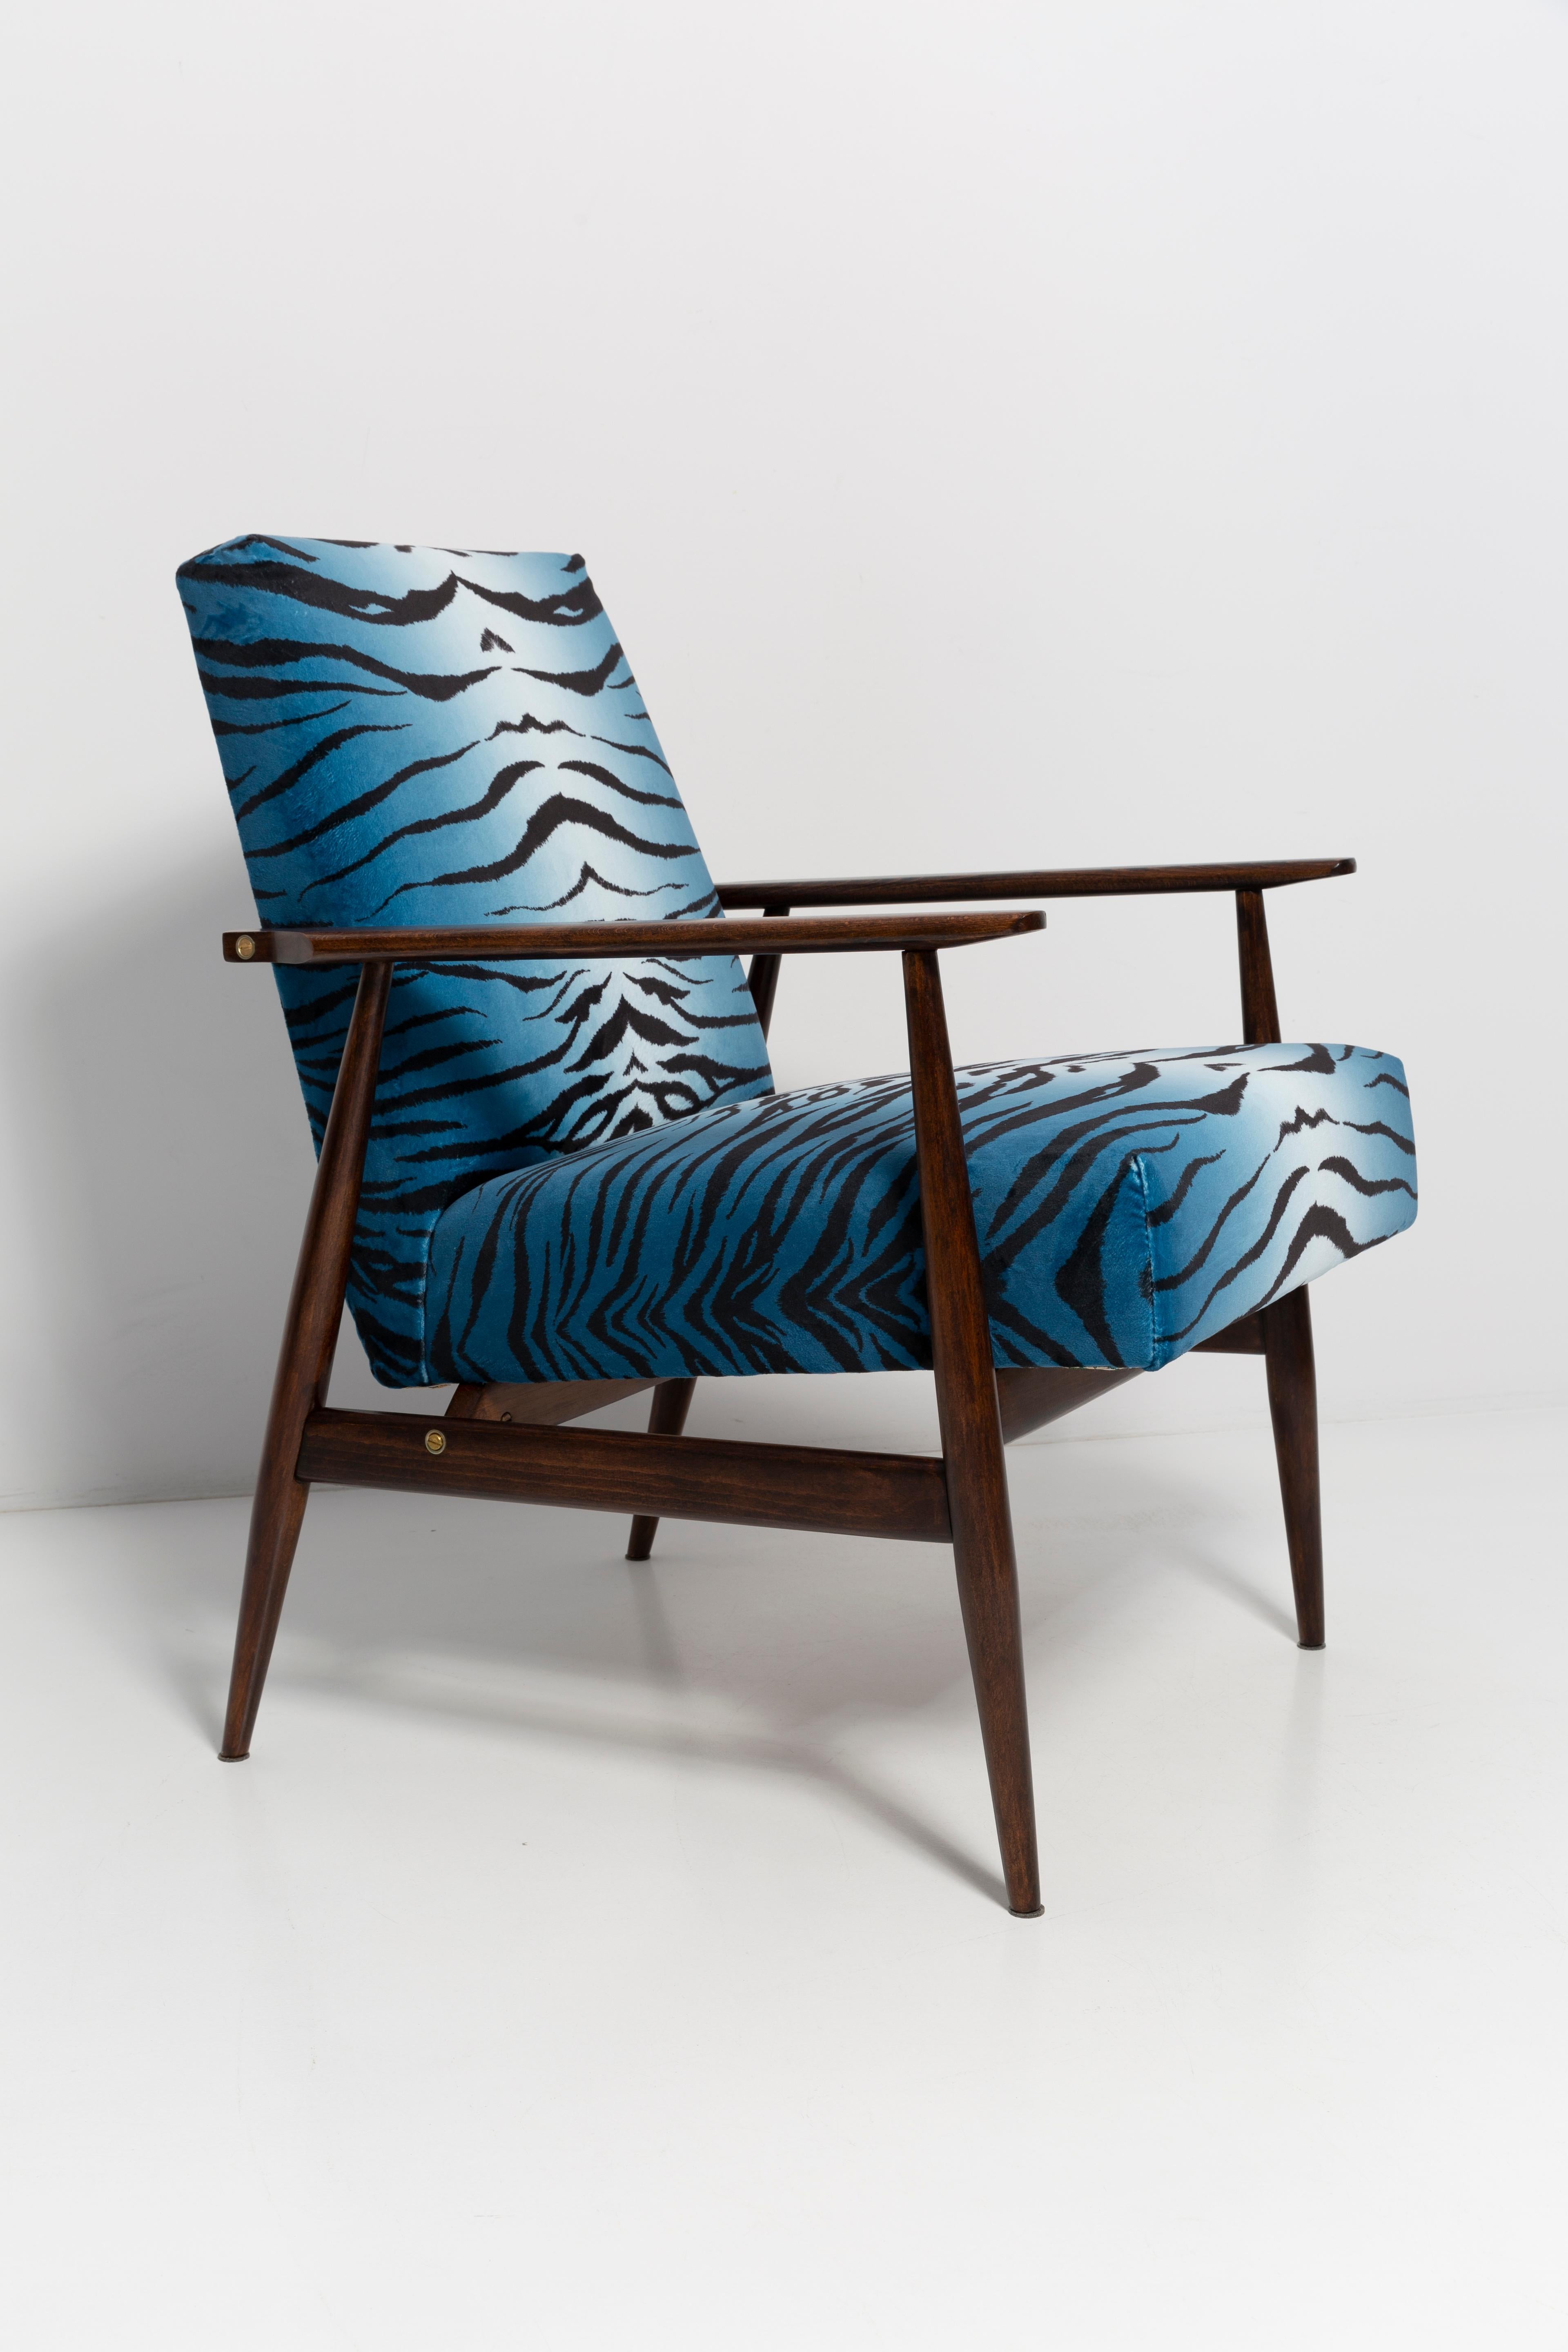 A beautiful, restored armchairs designed by Henryk Lis. Furniture after full carpentry and upholstery renovation. The fabric, which is covered with a backrest and a seat, is a high-quality Italian velvet upholstery printed in blue zebra pattern. The